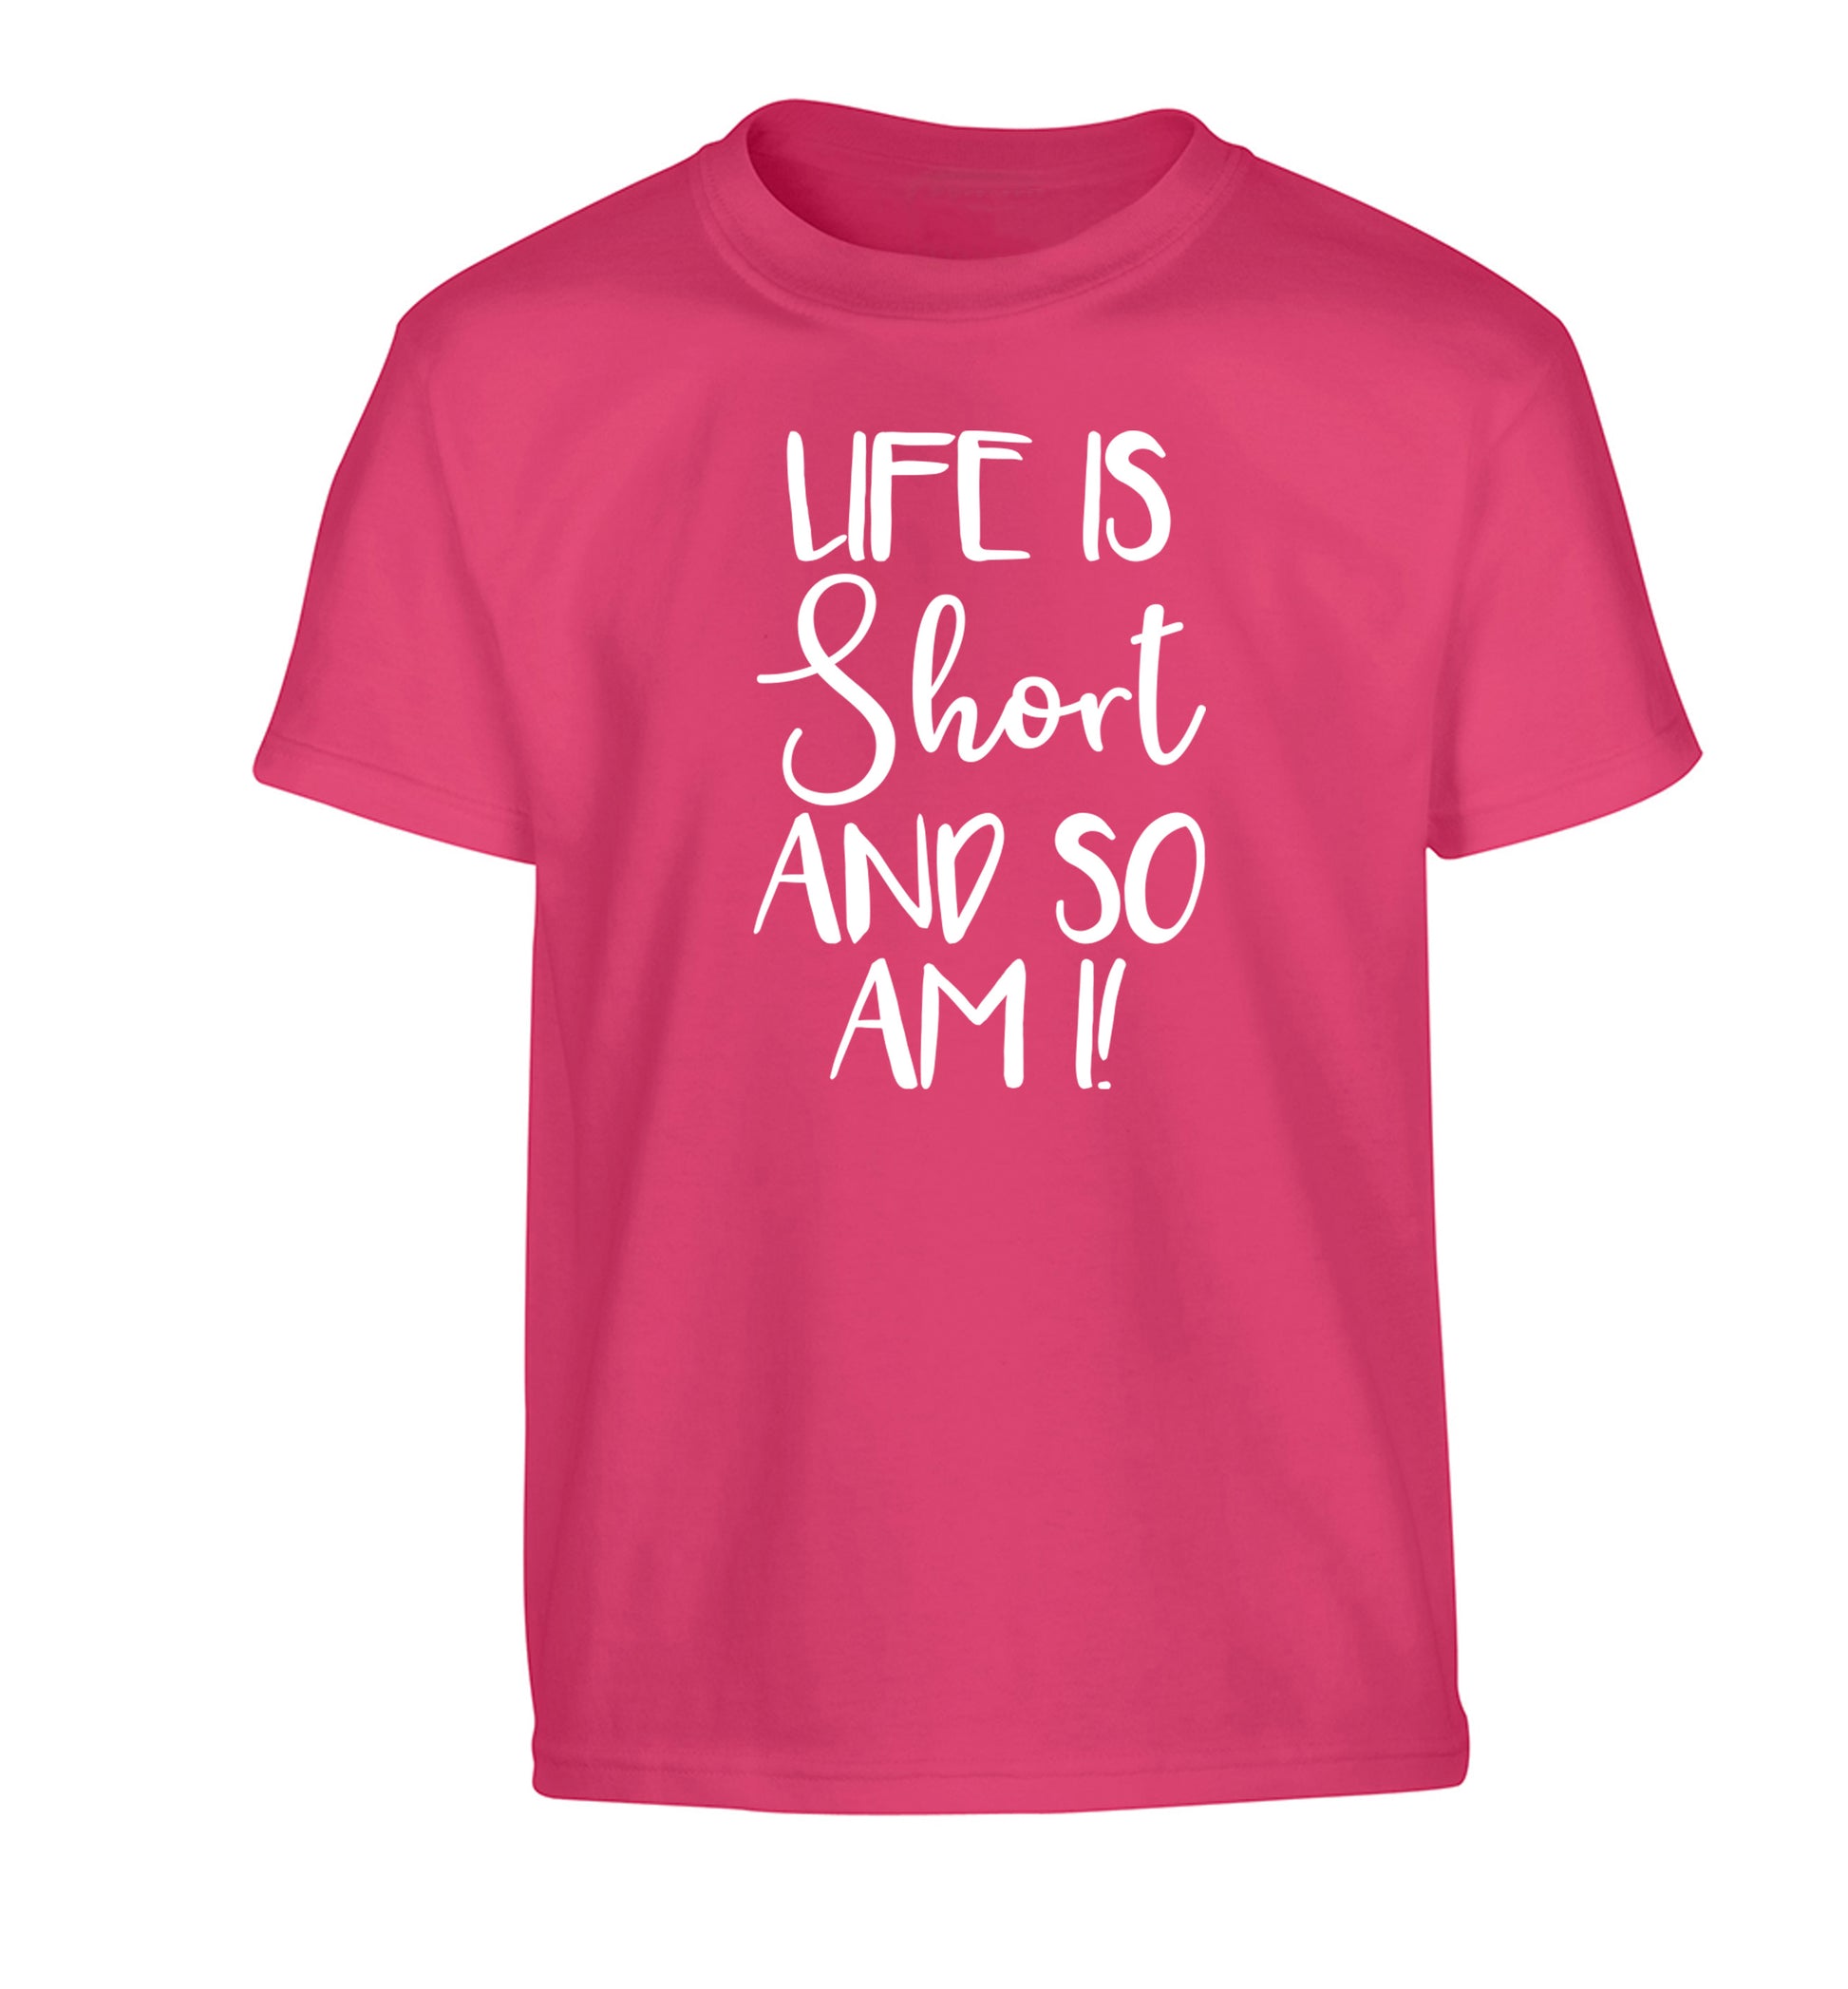 Life is short and so am I! Children's pink Tshirt 12-13 Years